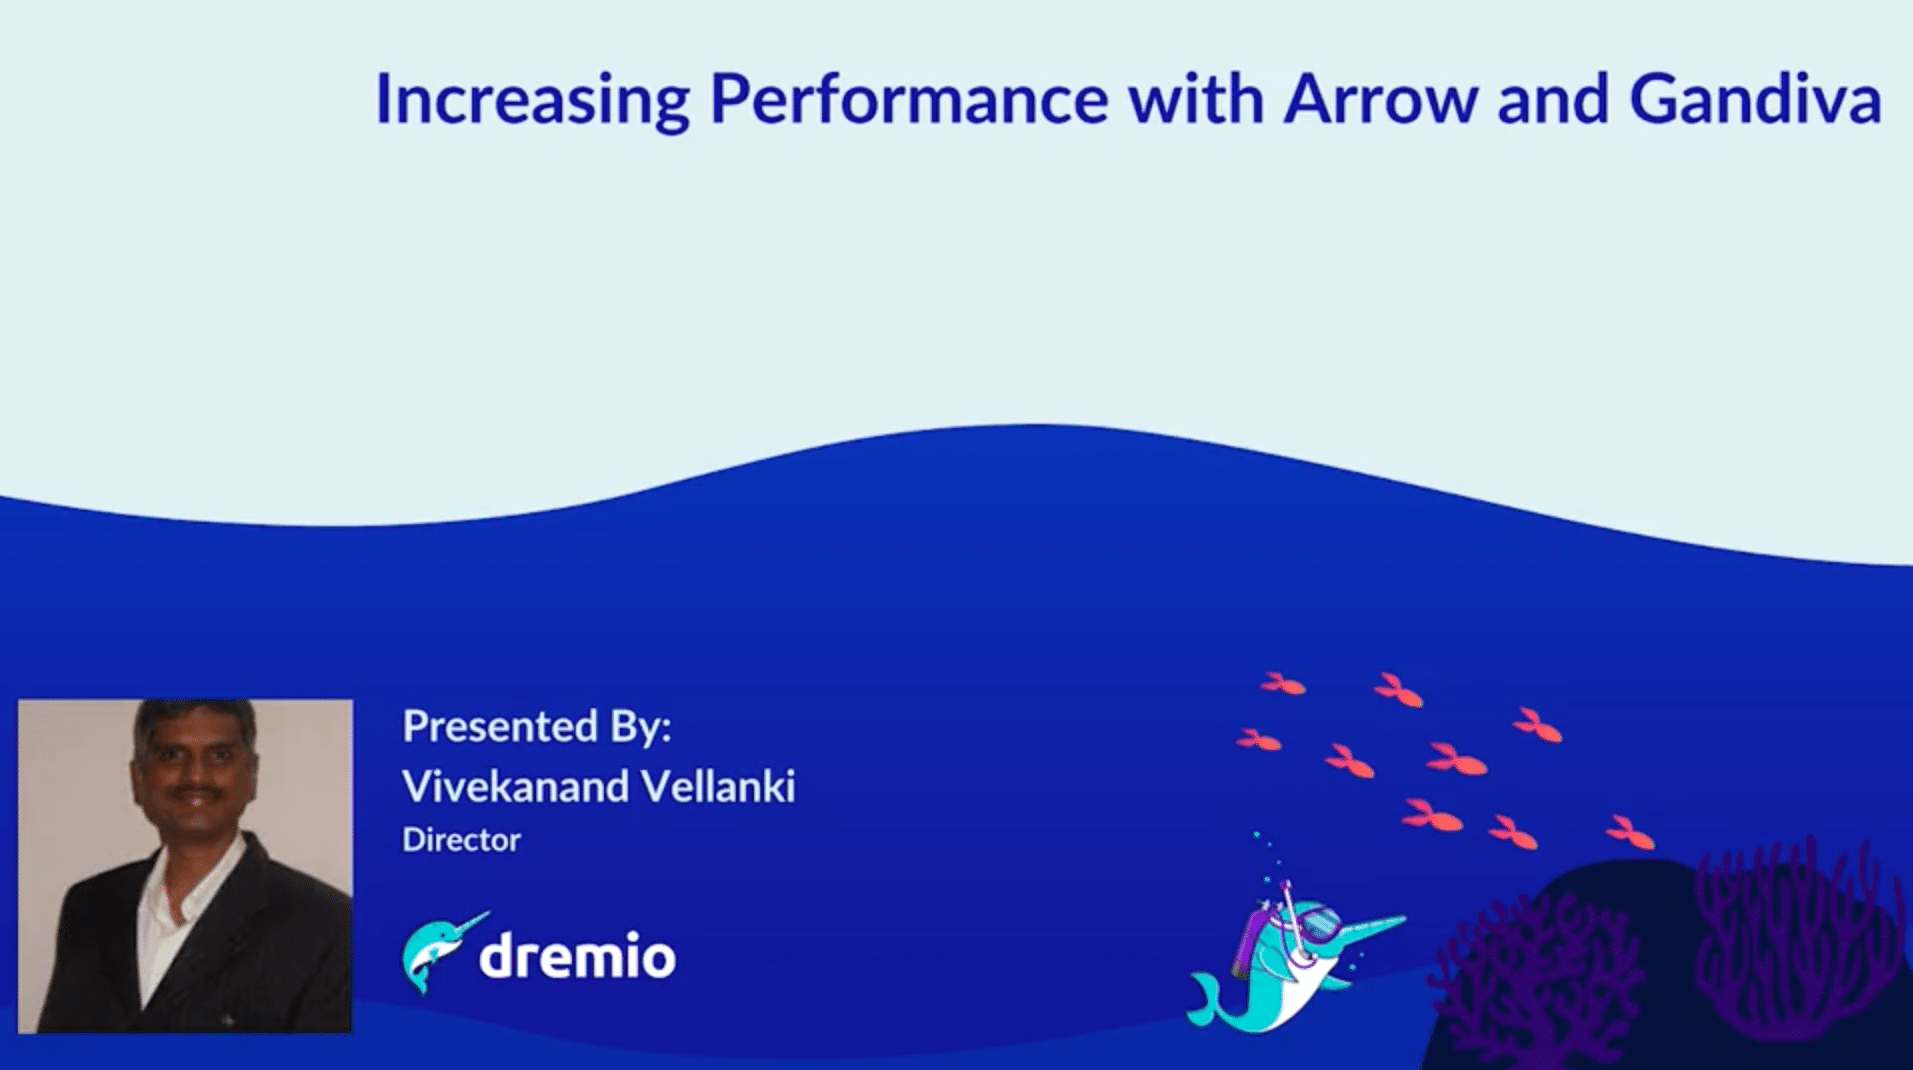 Increasing Performance with Arrow and Gandiva